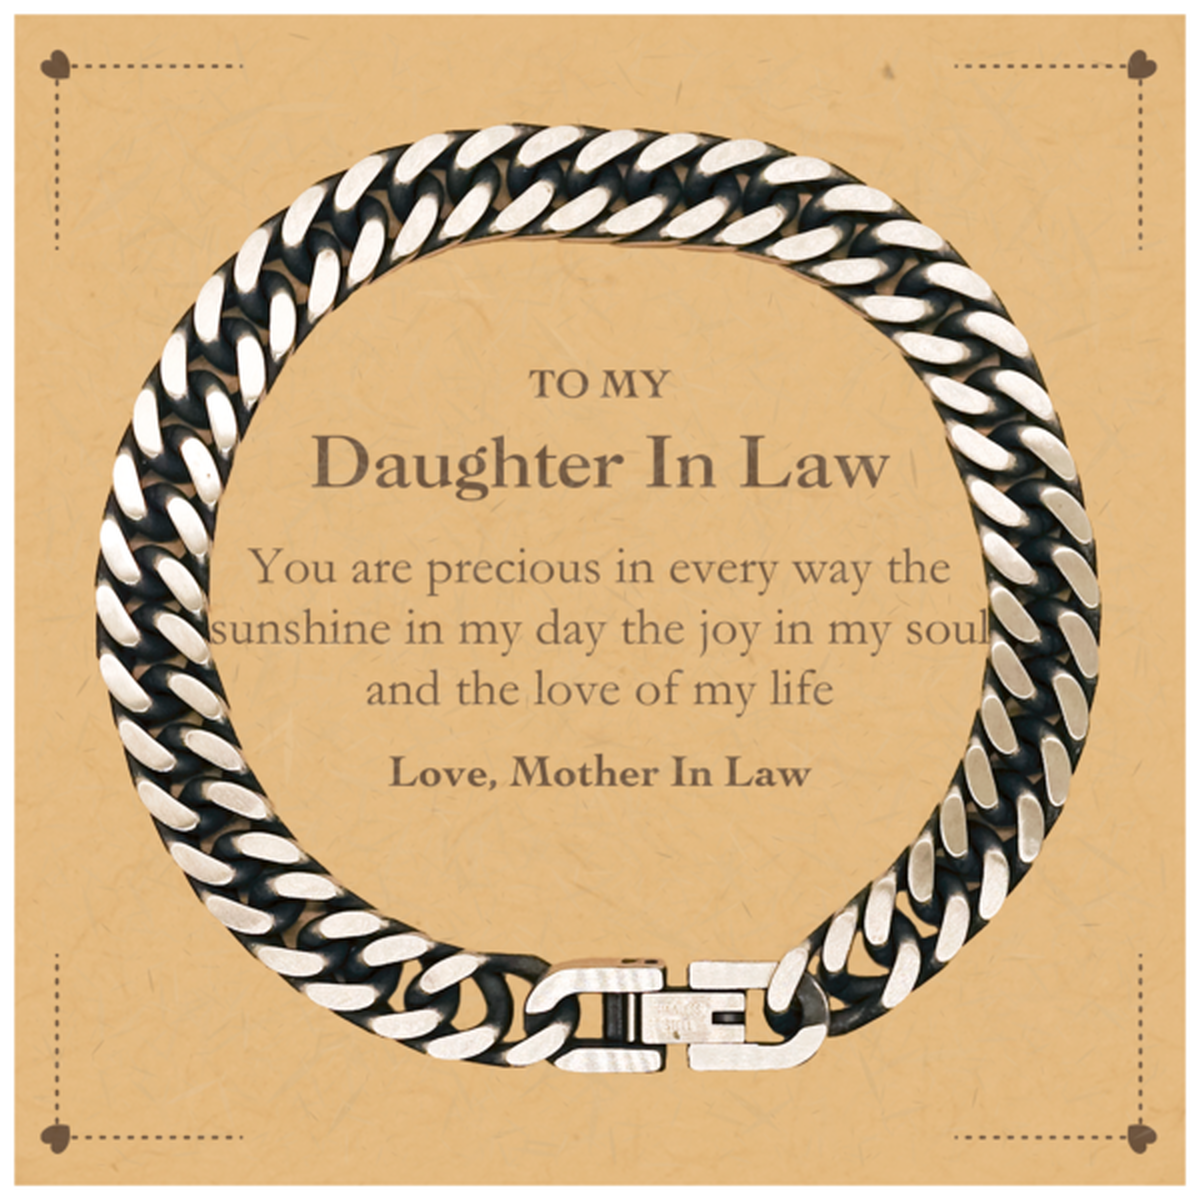 Graduation Gifts for Daughter In Law Cuban Link Chain Bracelet Present from Mother In Law, Christmas Daughter In Law Birthday Gifts Daughter In Law You are precious in every way the sunshine in my day. Love, Mother In Law